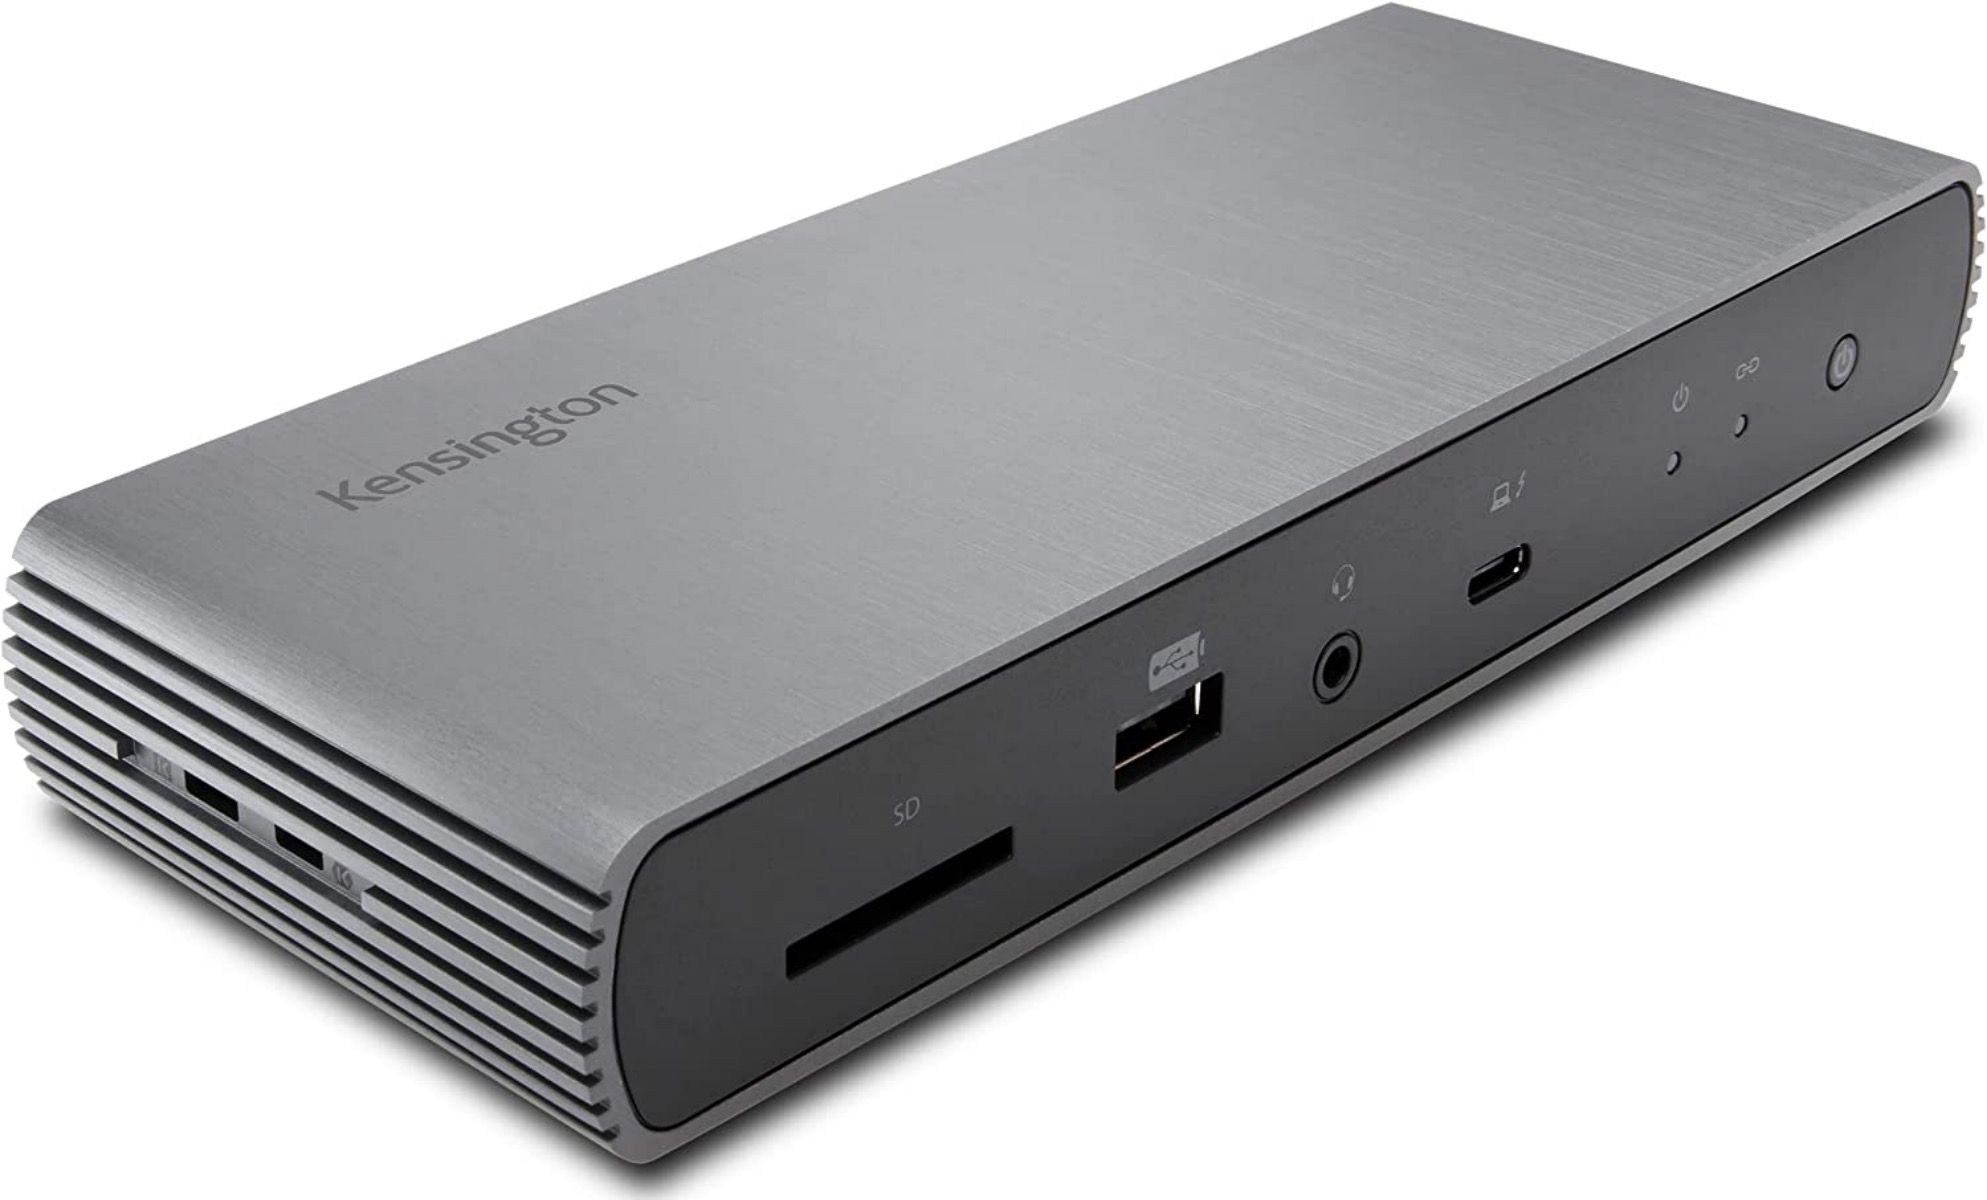 Kensington SD5700T Thunderbolt 4 docking station without cables attached